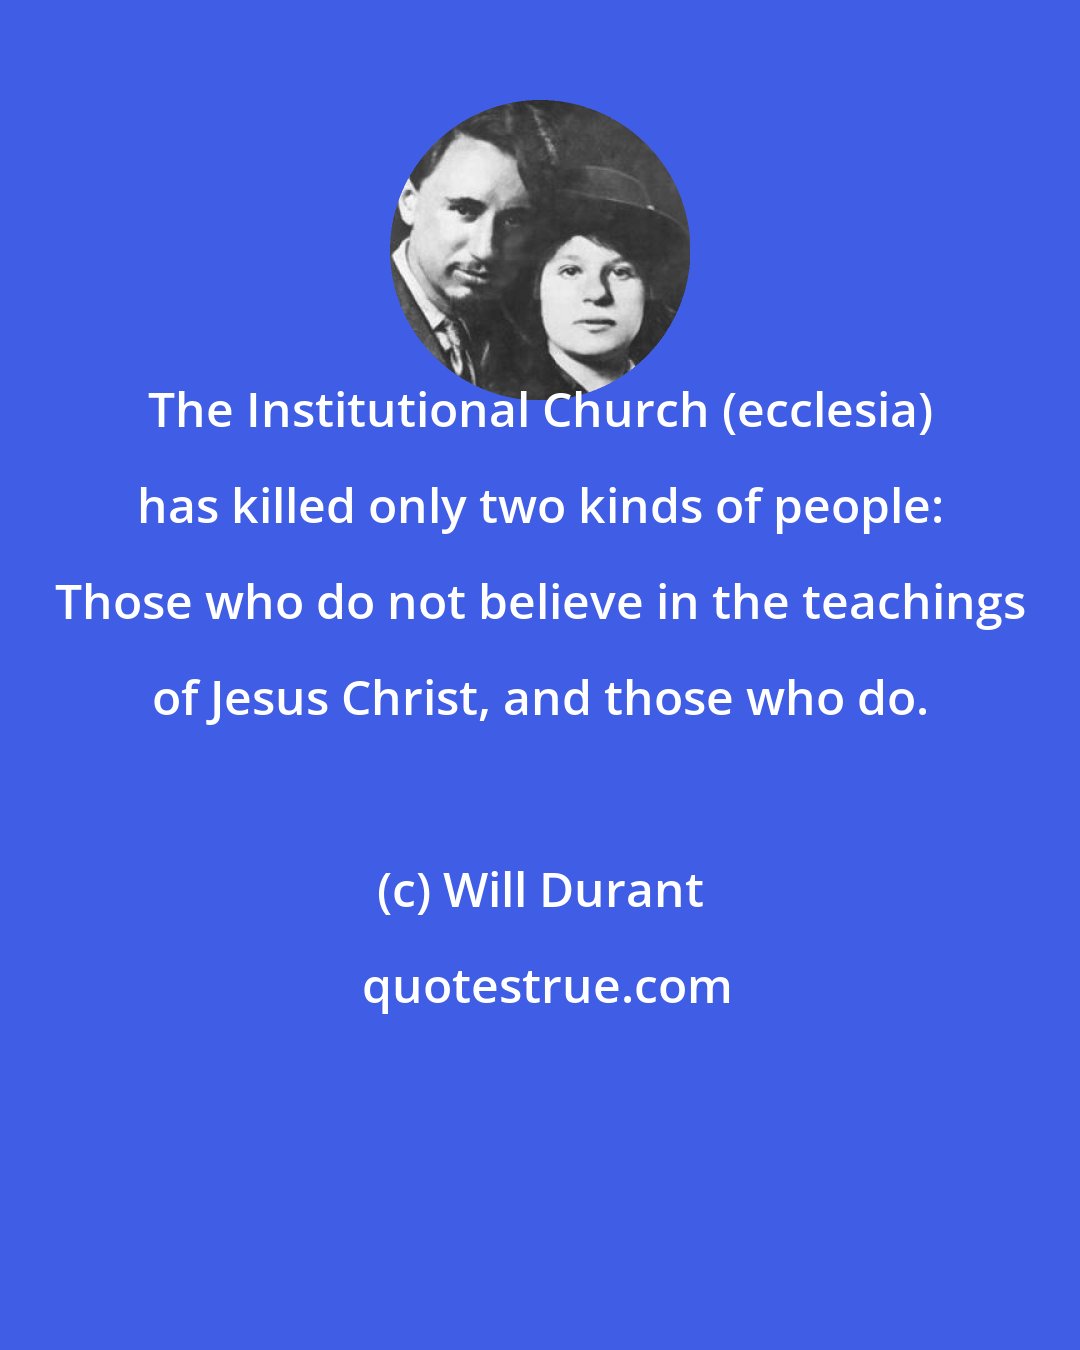 Will Durant: The Institutional Church (ecclesia) has killed only two kinds of people: Those who do not believe in the teachings of Jesus Christ, and those who do.